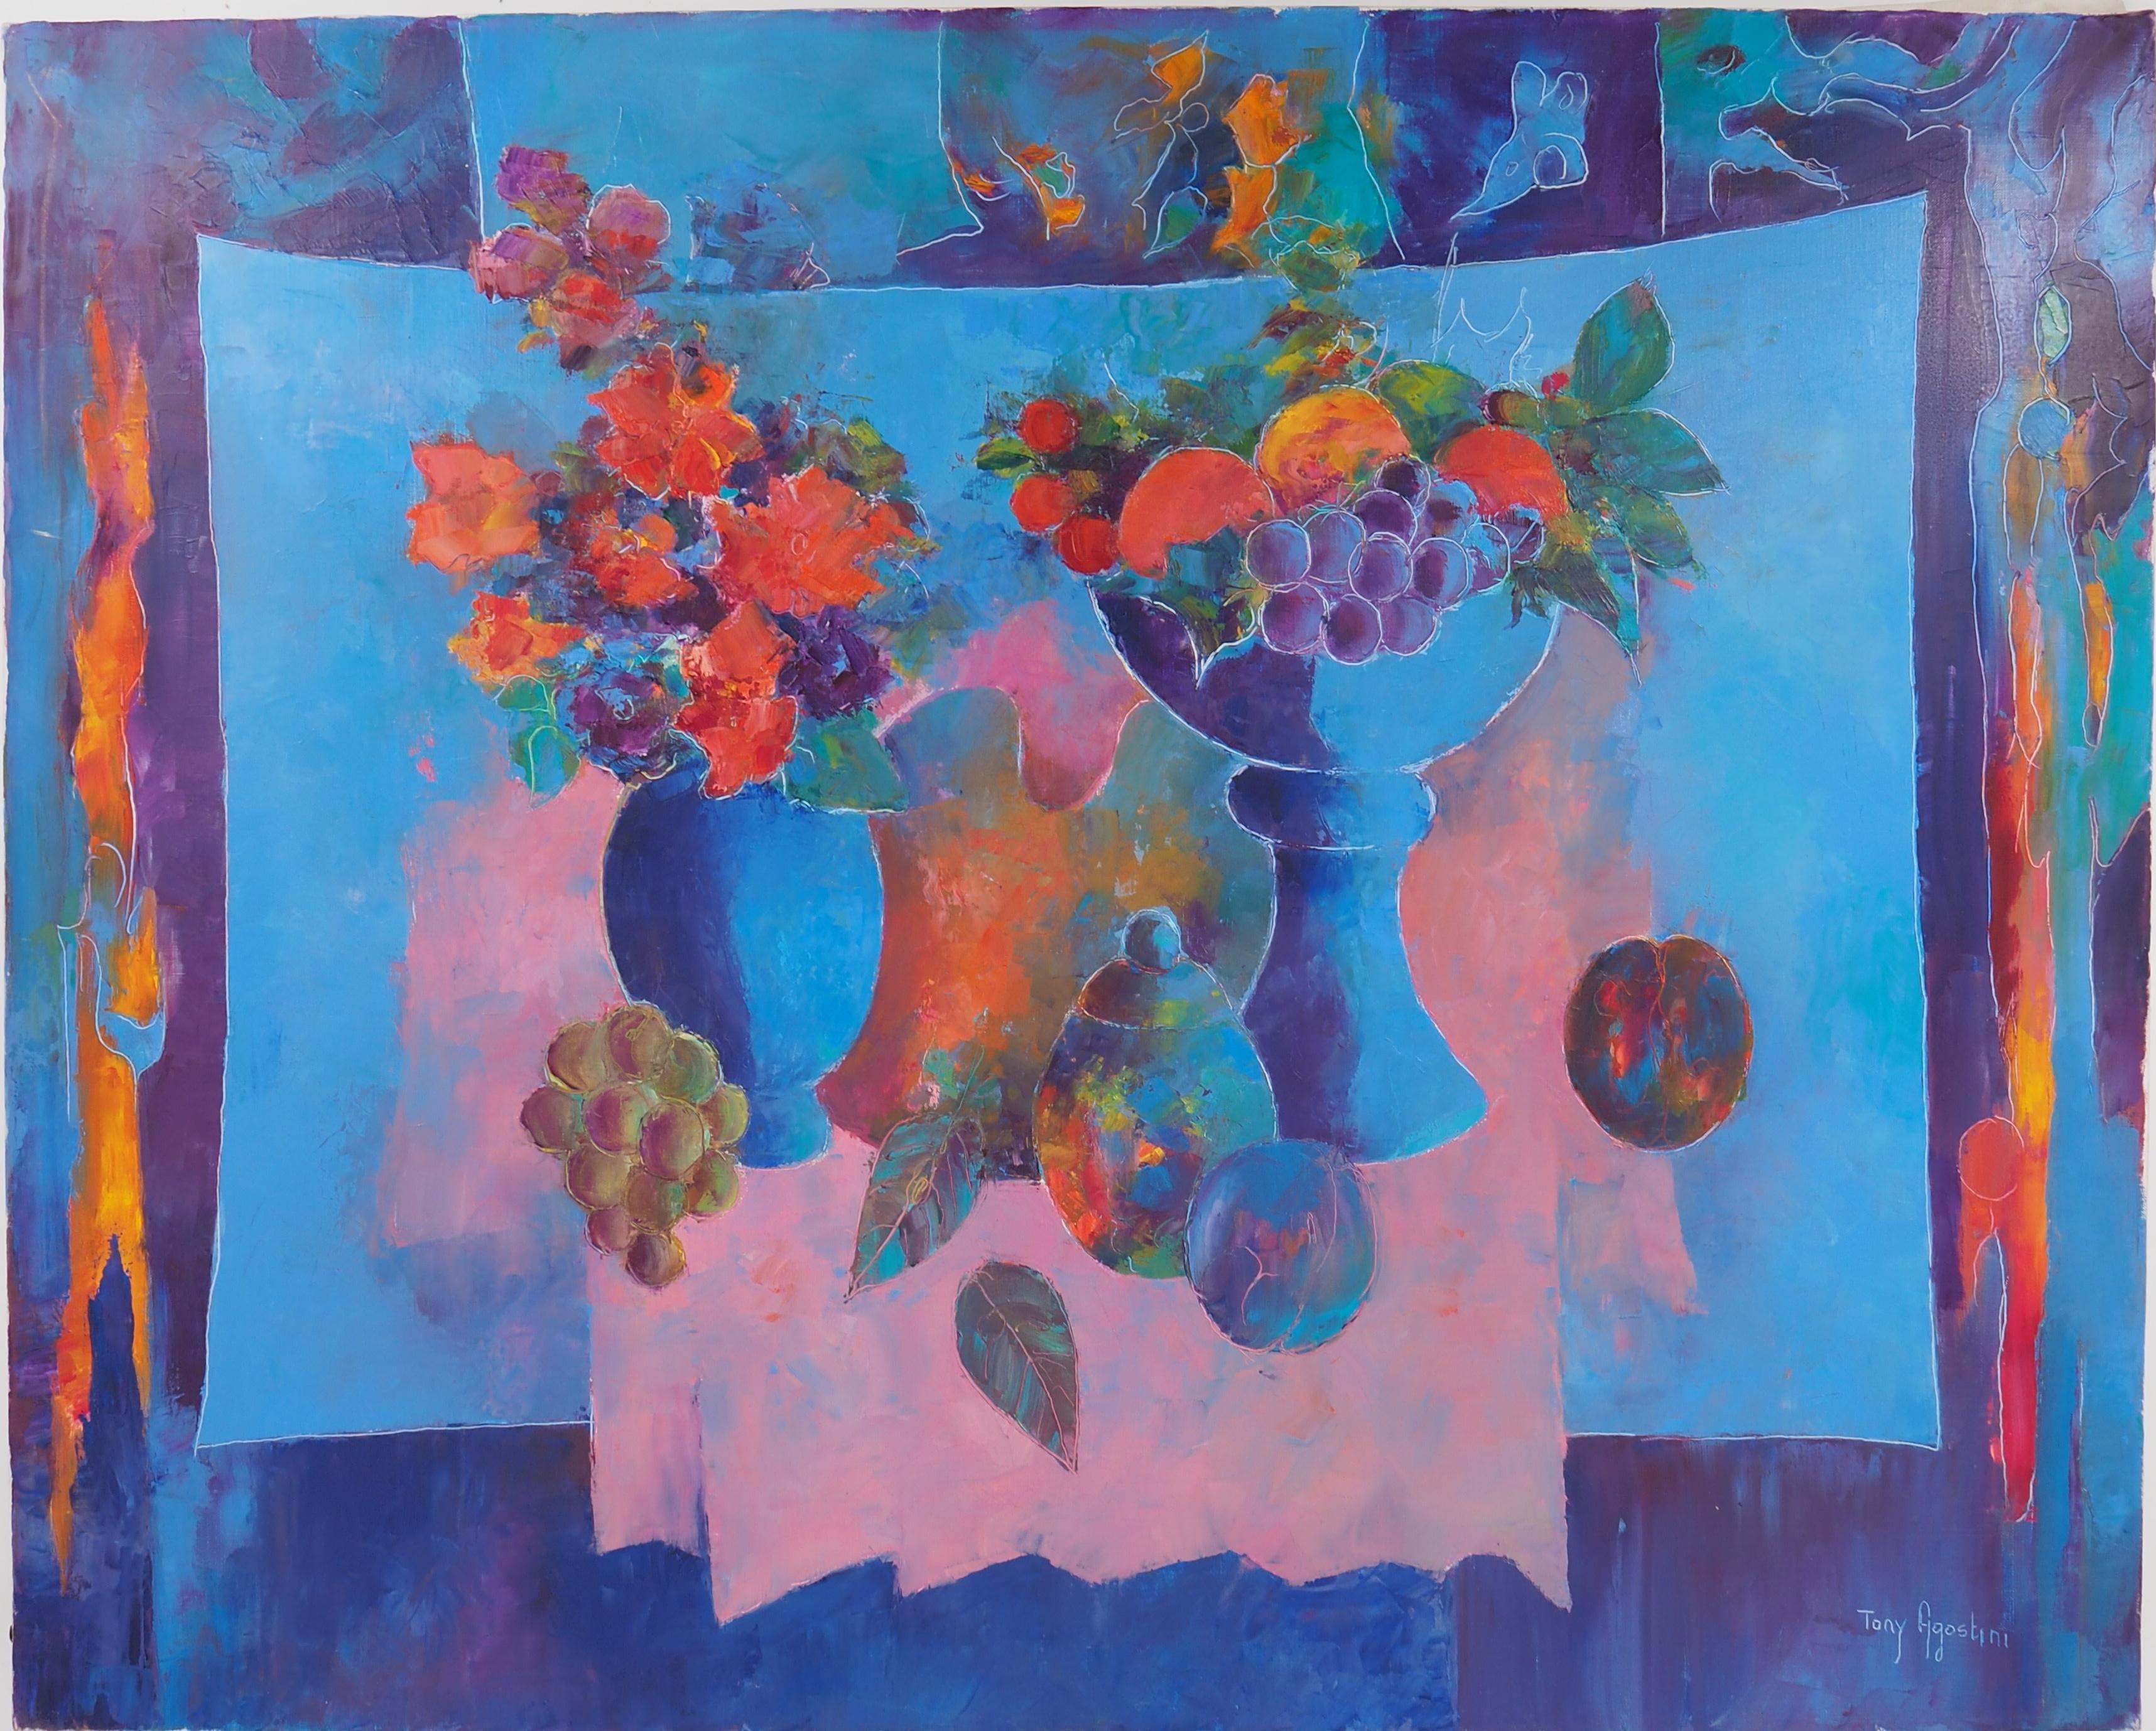 Tony Agostini Interior Painting - Fruits and Flowers on Blue Backgroung - Original Oil on canvas, Handsigned